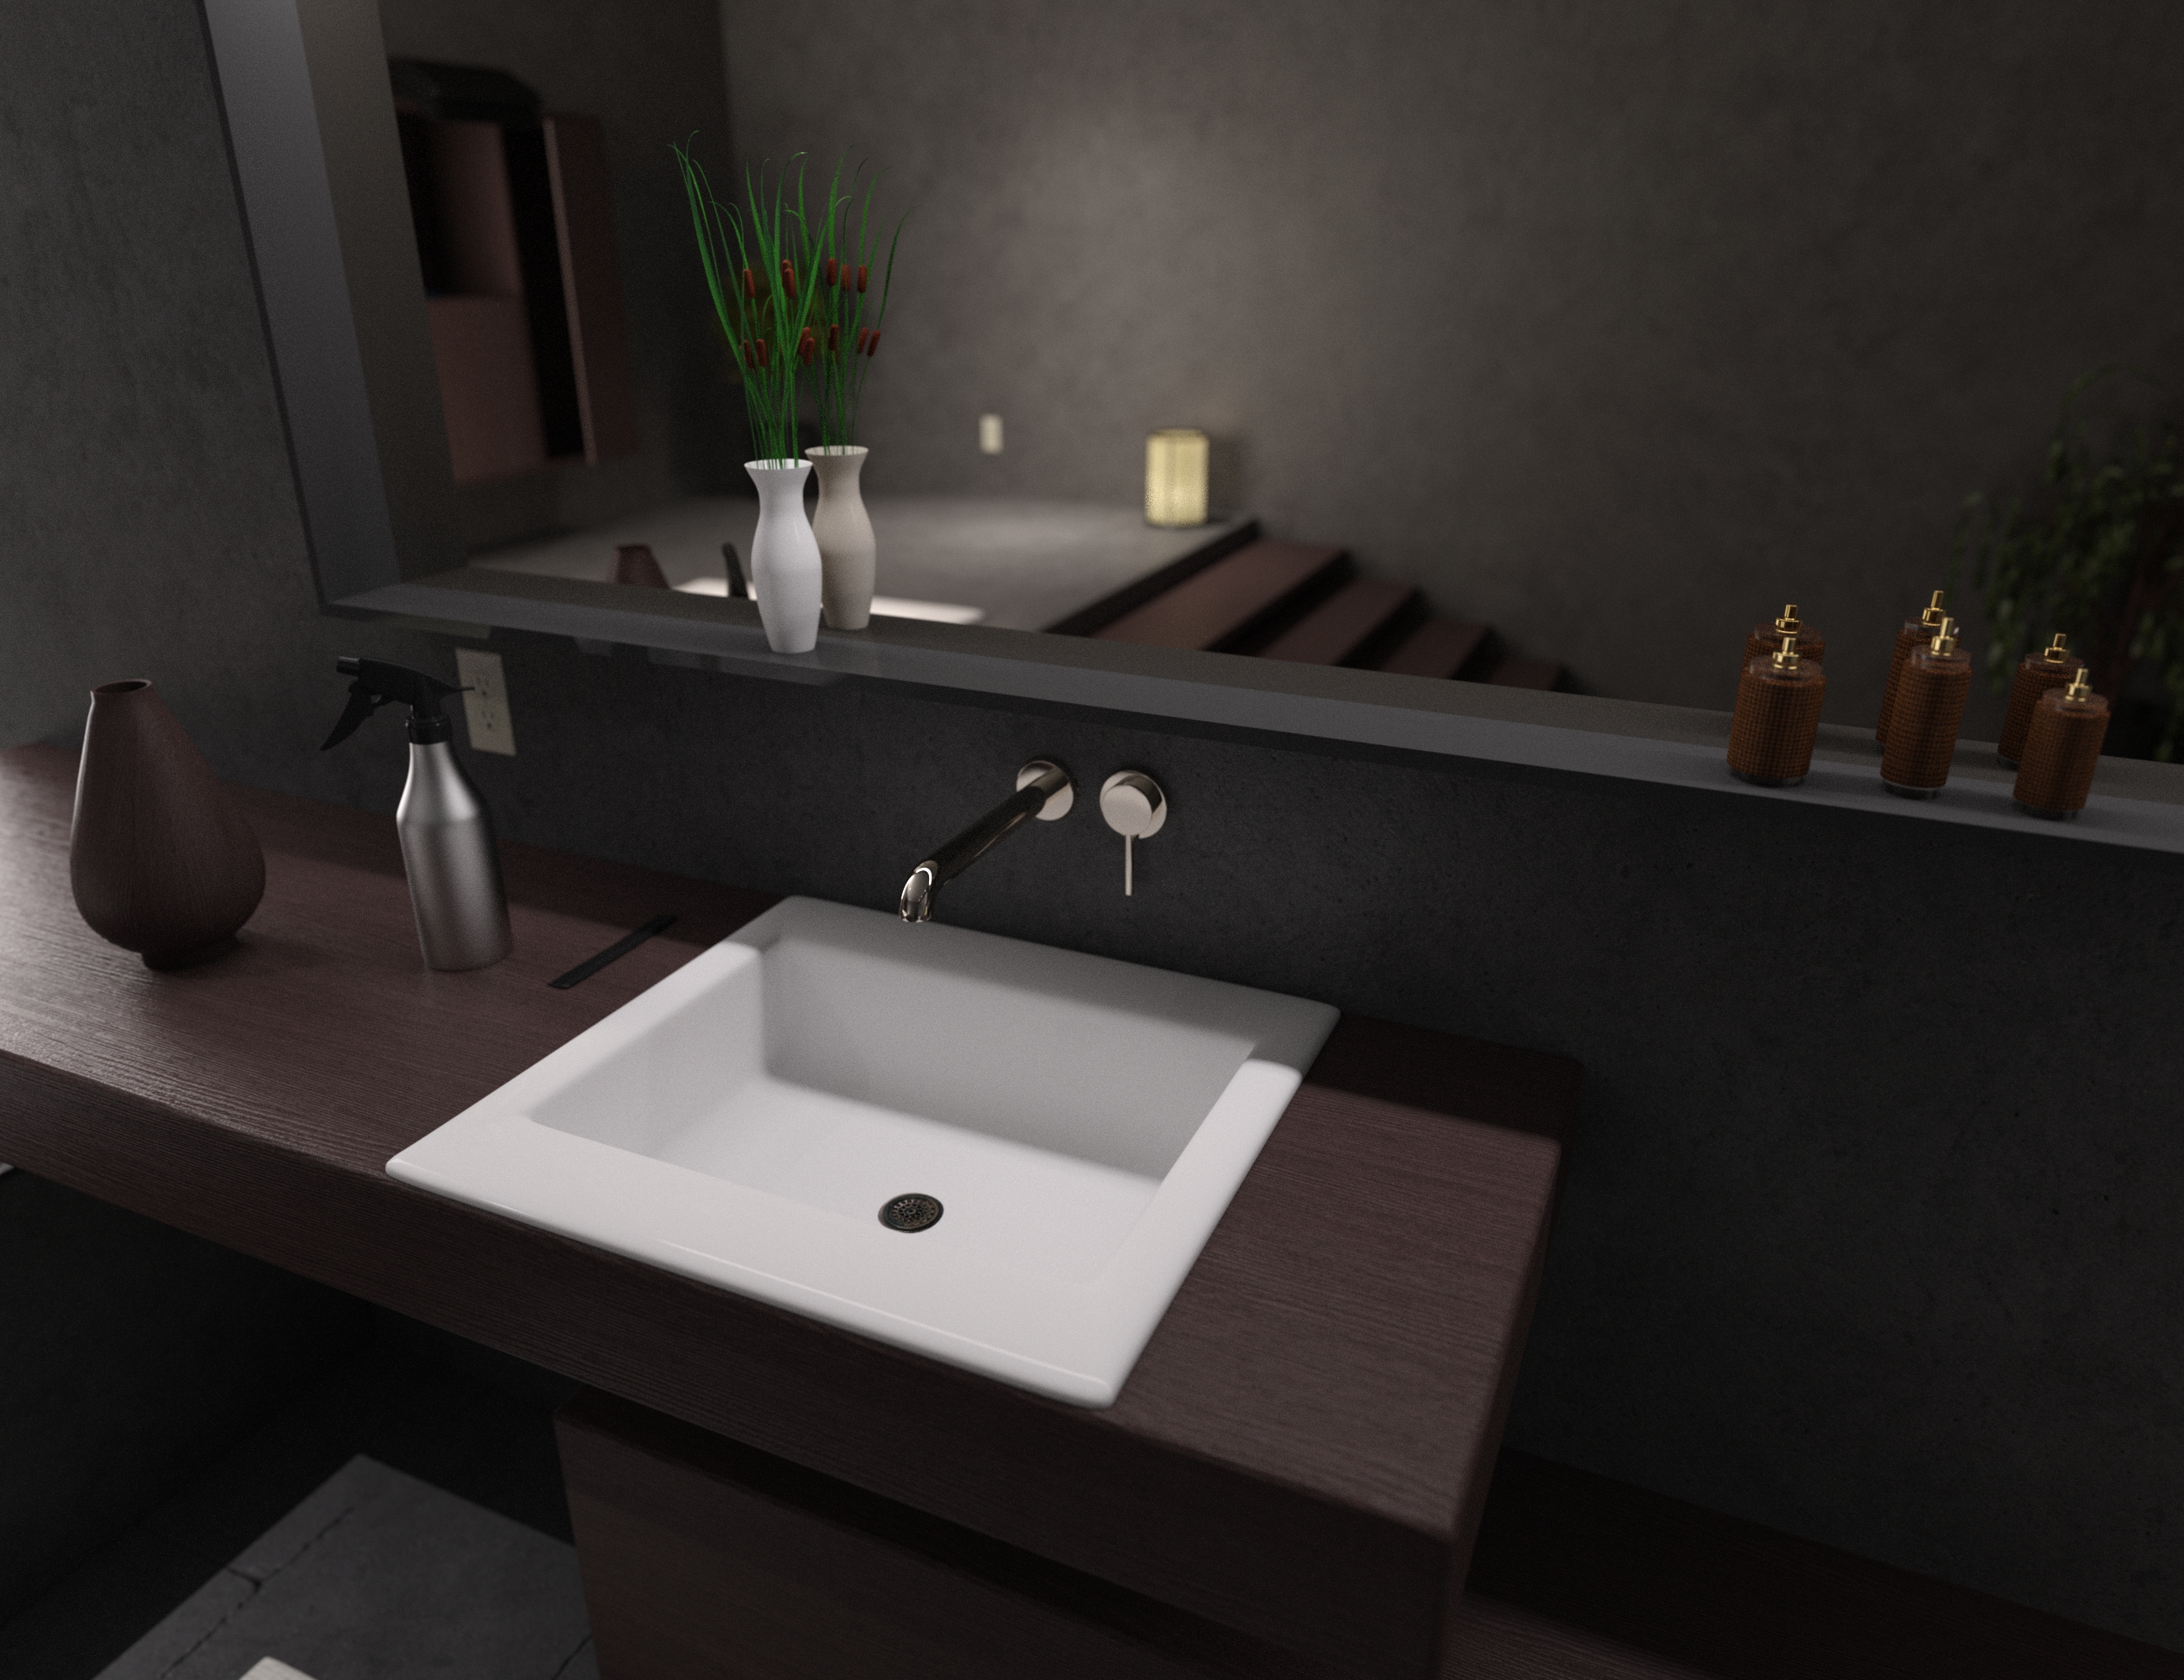 Ultimate Patio Home - Bathroom by: ImagineX, 3D Models by Daz 3D